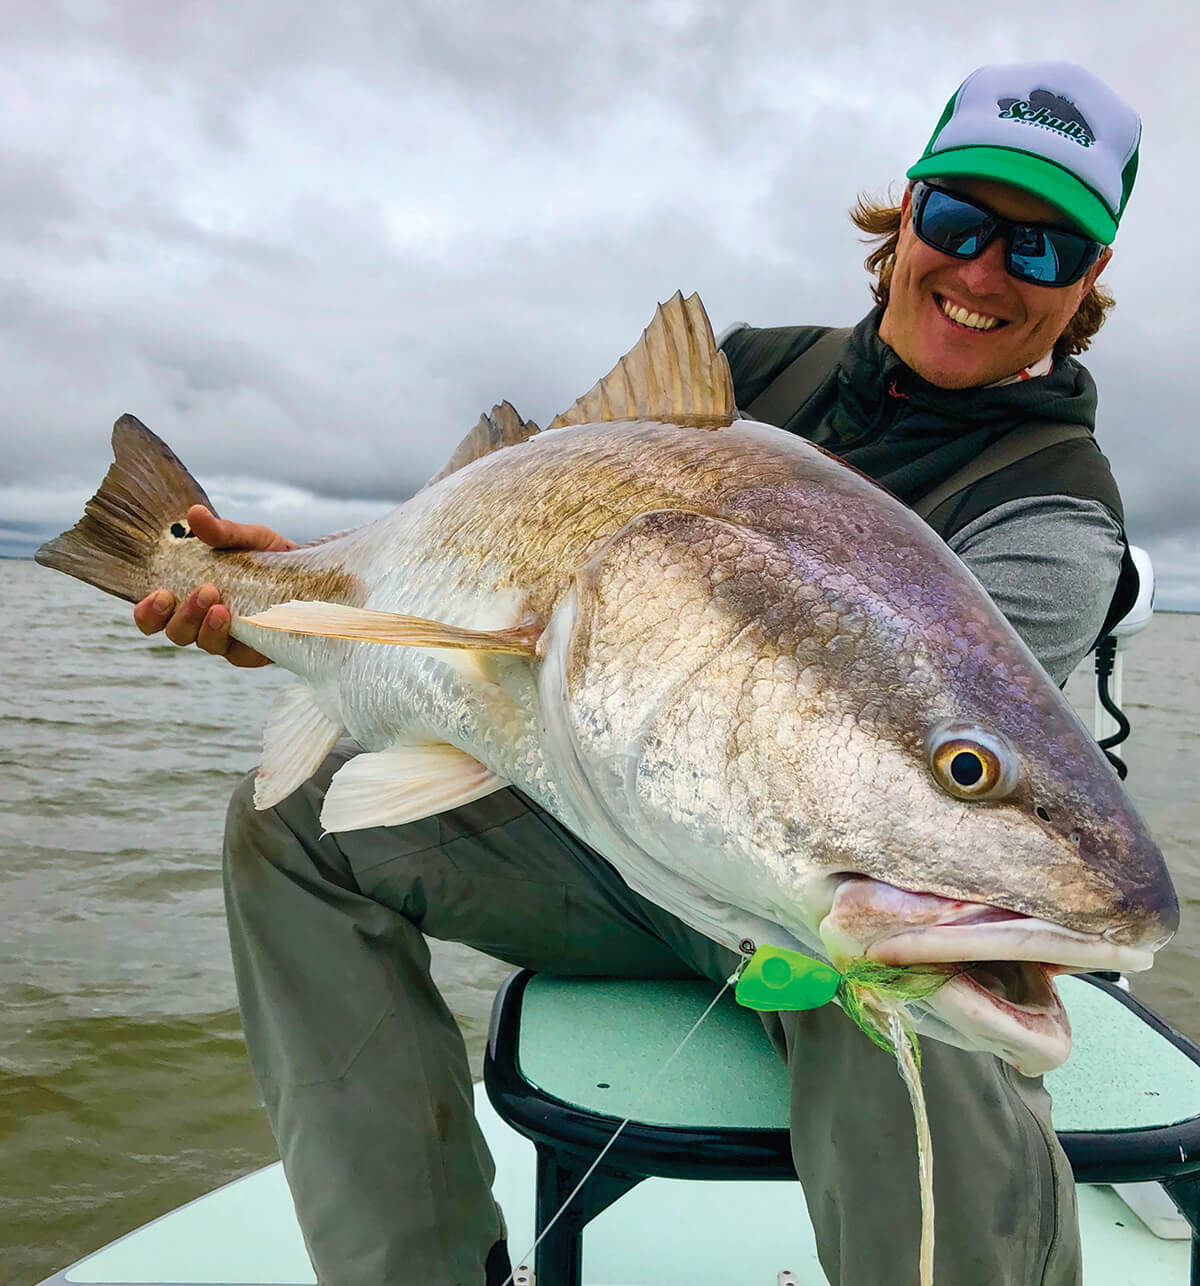 The best sight-fishing tool for redfish